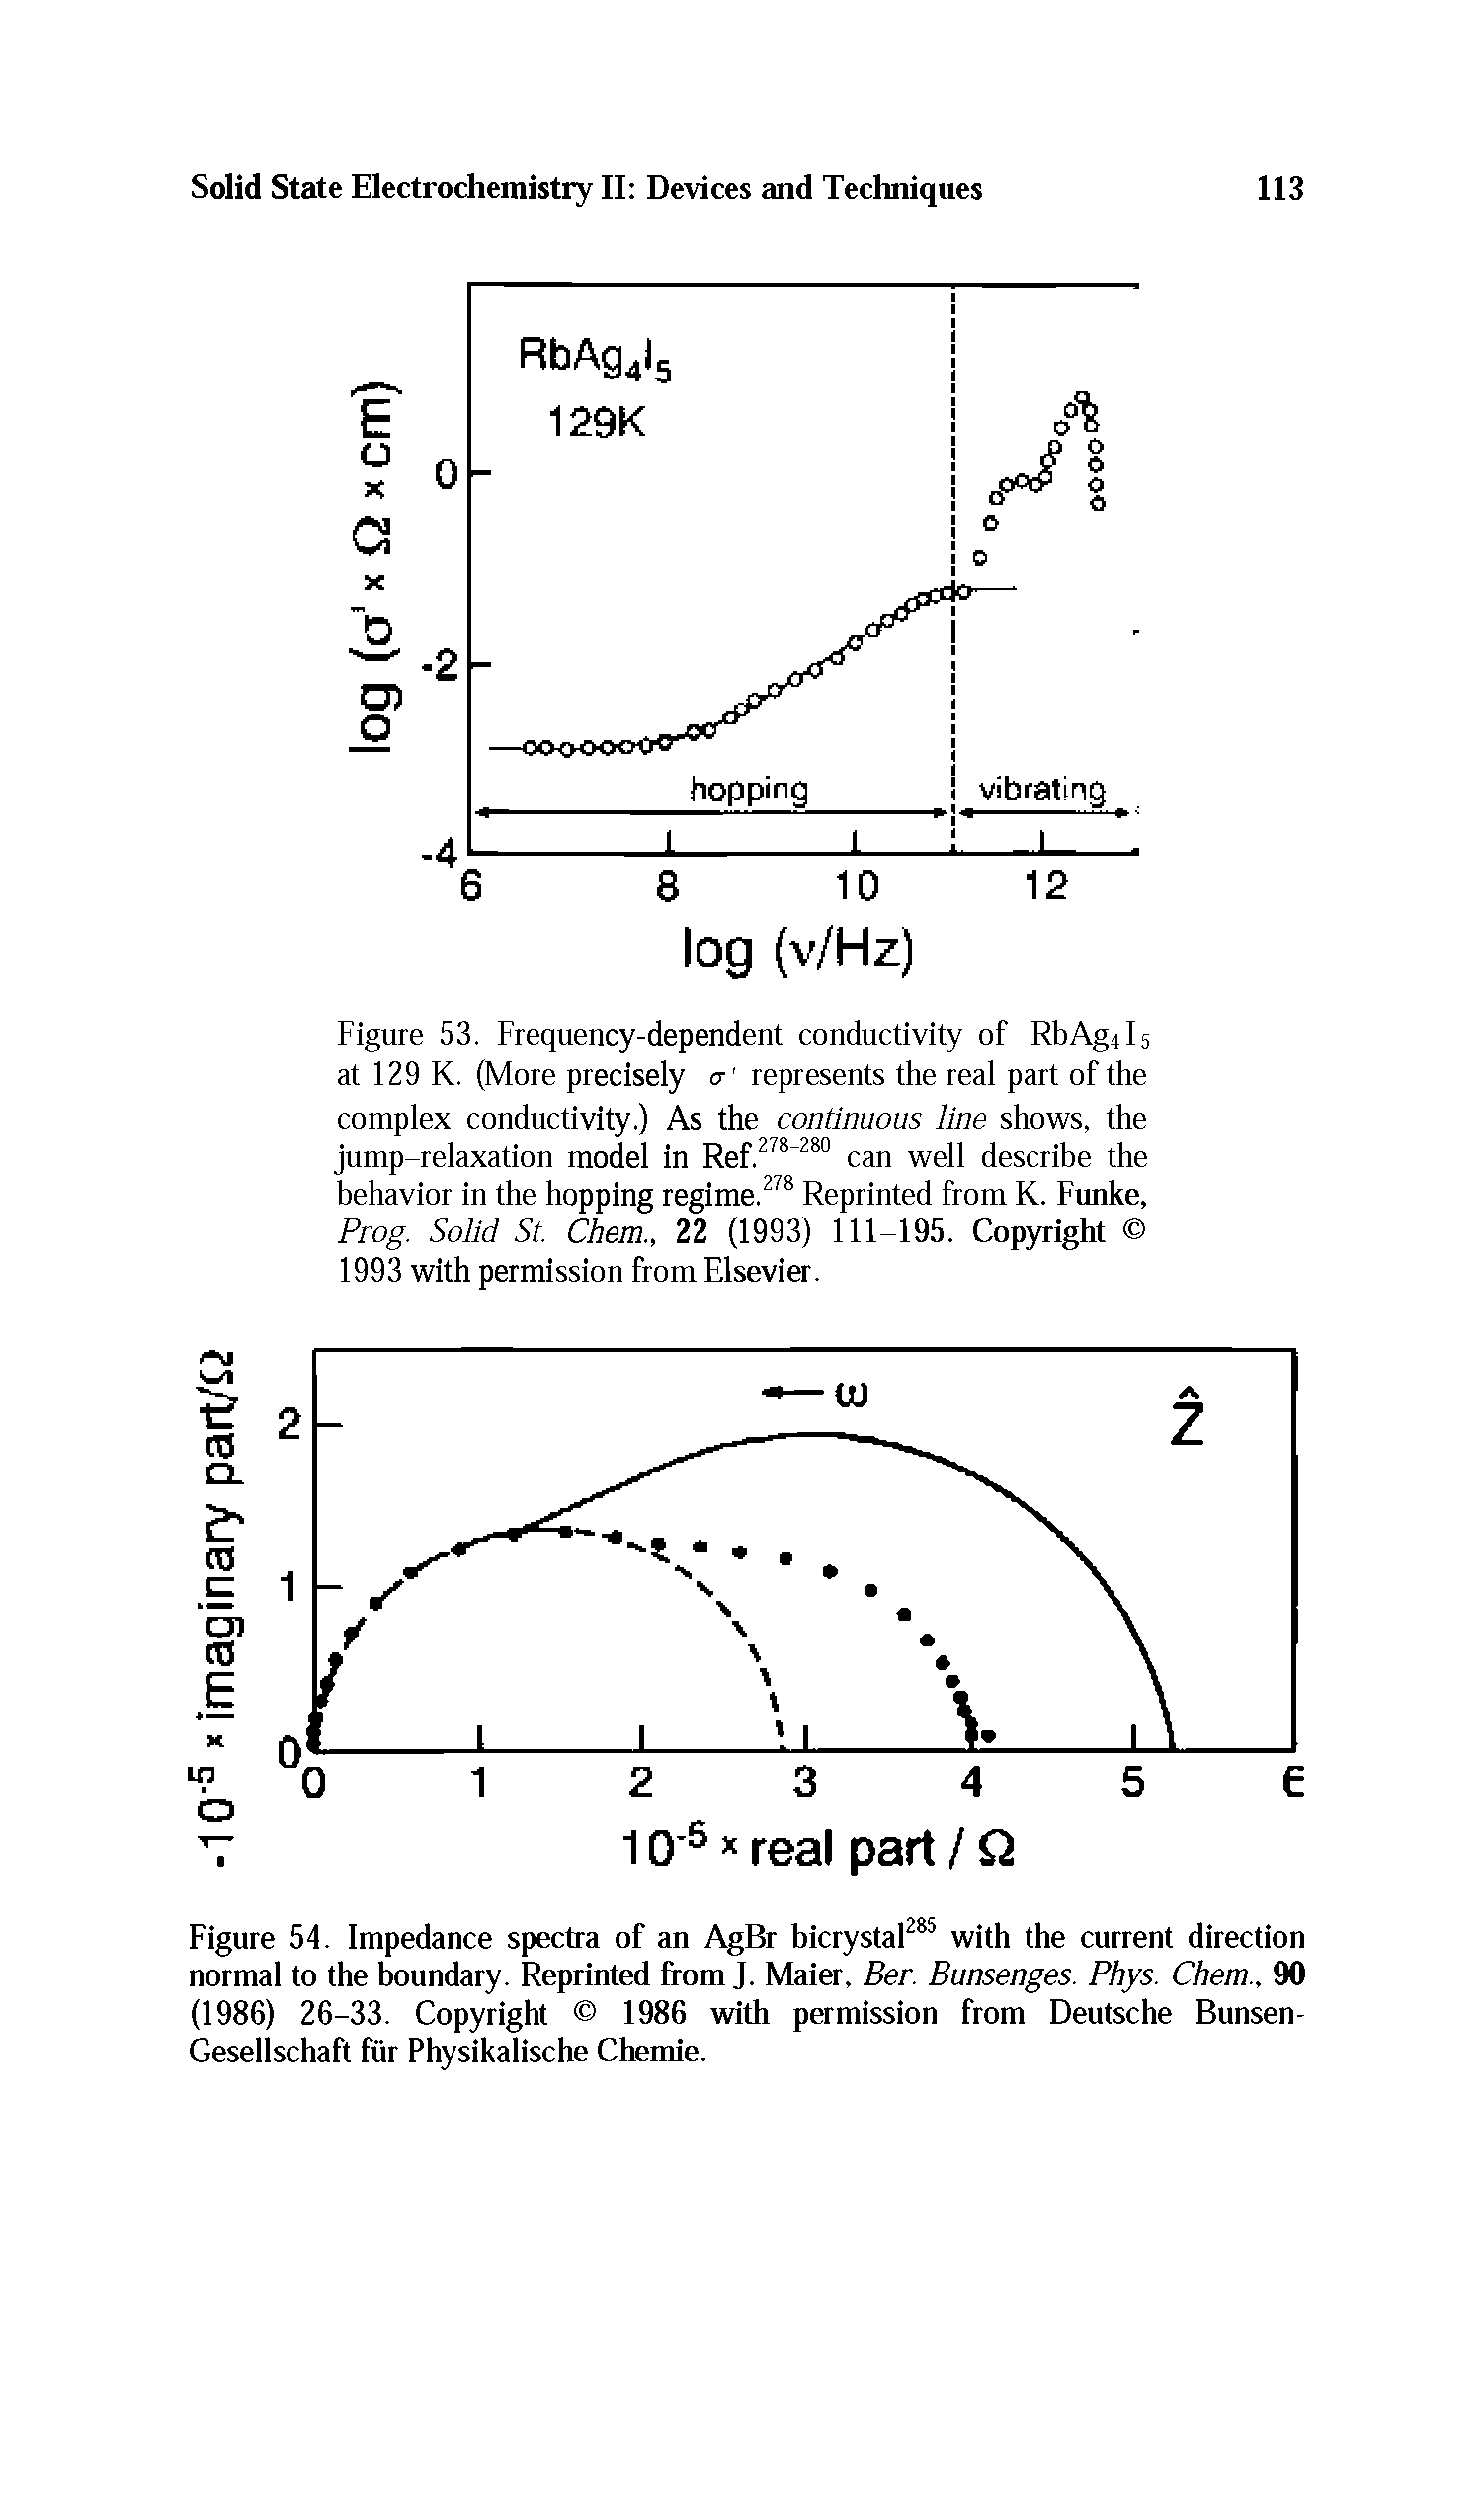 Figure 53. Frequency-dependent conductivity of RbAg4ls at 129 K. (More precisely a- represents the real part of the complex conductivity.) As the continuous line shows, the jump-relaxation model in Ref.278-280 can well describe the behavior in the hopping regime.278 Reprinted from K. Funke, Prog. Solid St Chem., 22 (1993) 111-195. Copyright 1993 with permission from Elsevier.